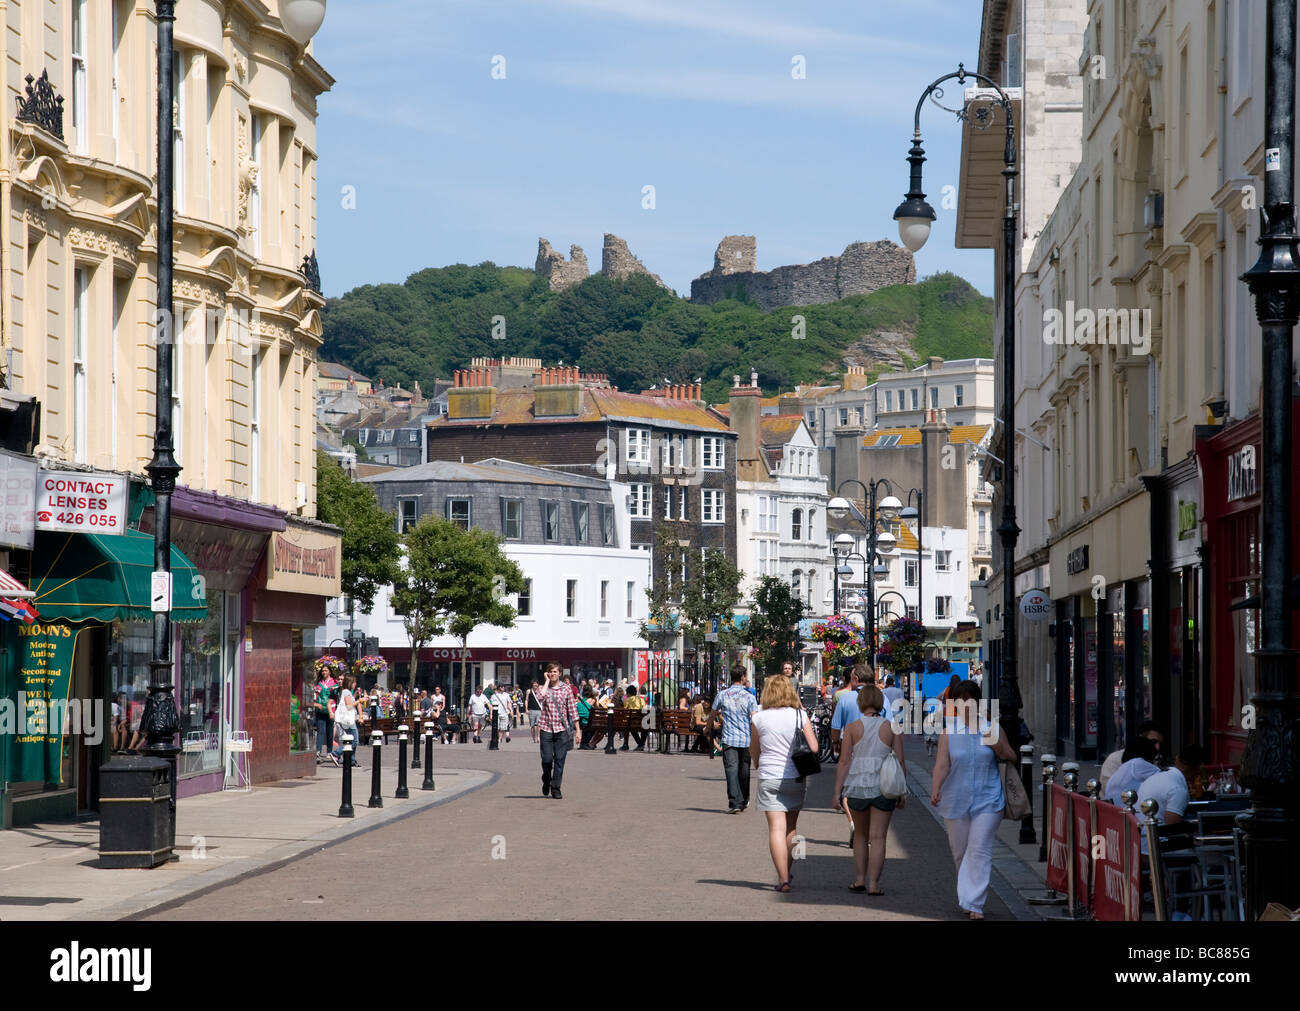 Hastings Town Center, looking towards the Norman castle. Stock Photo